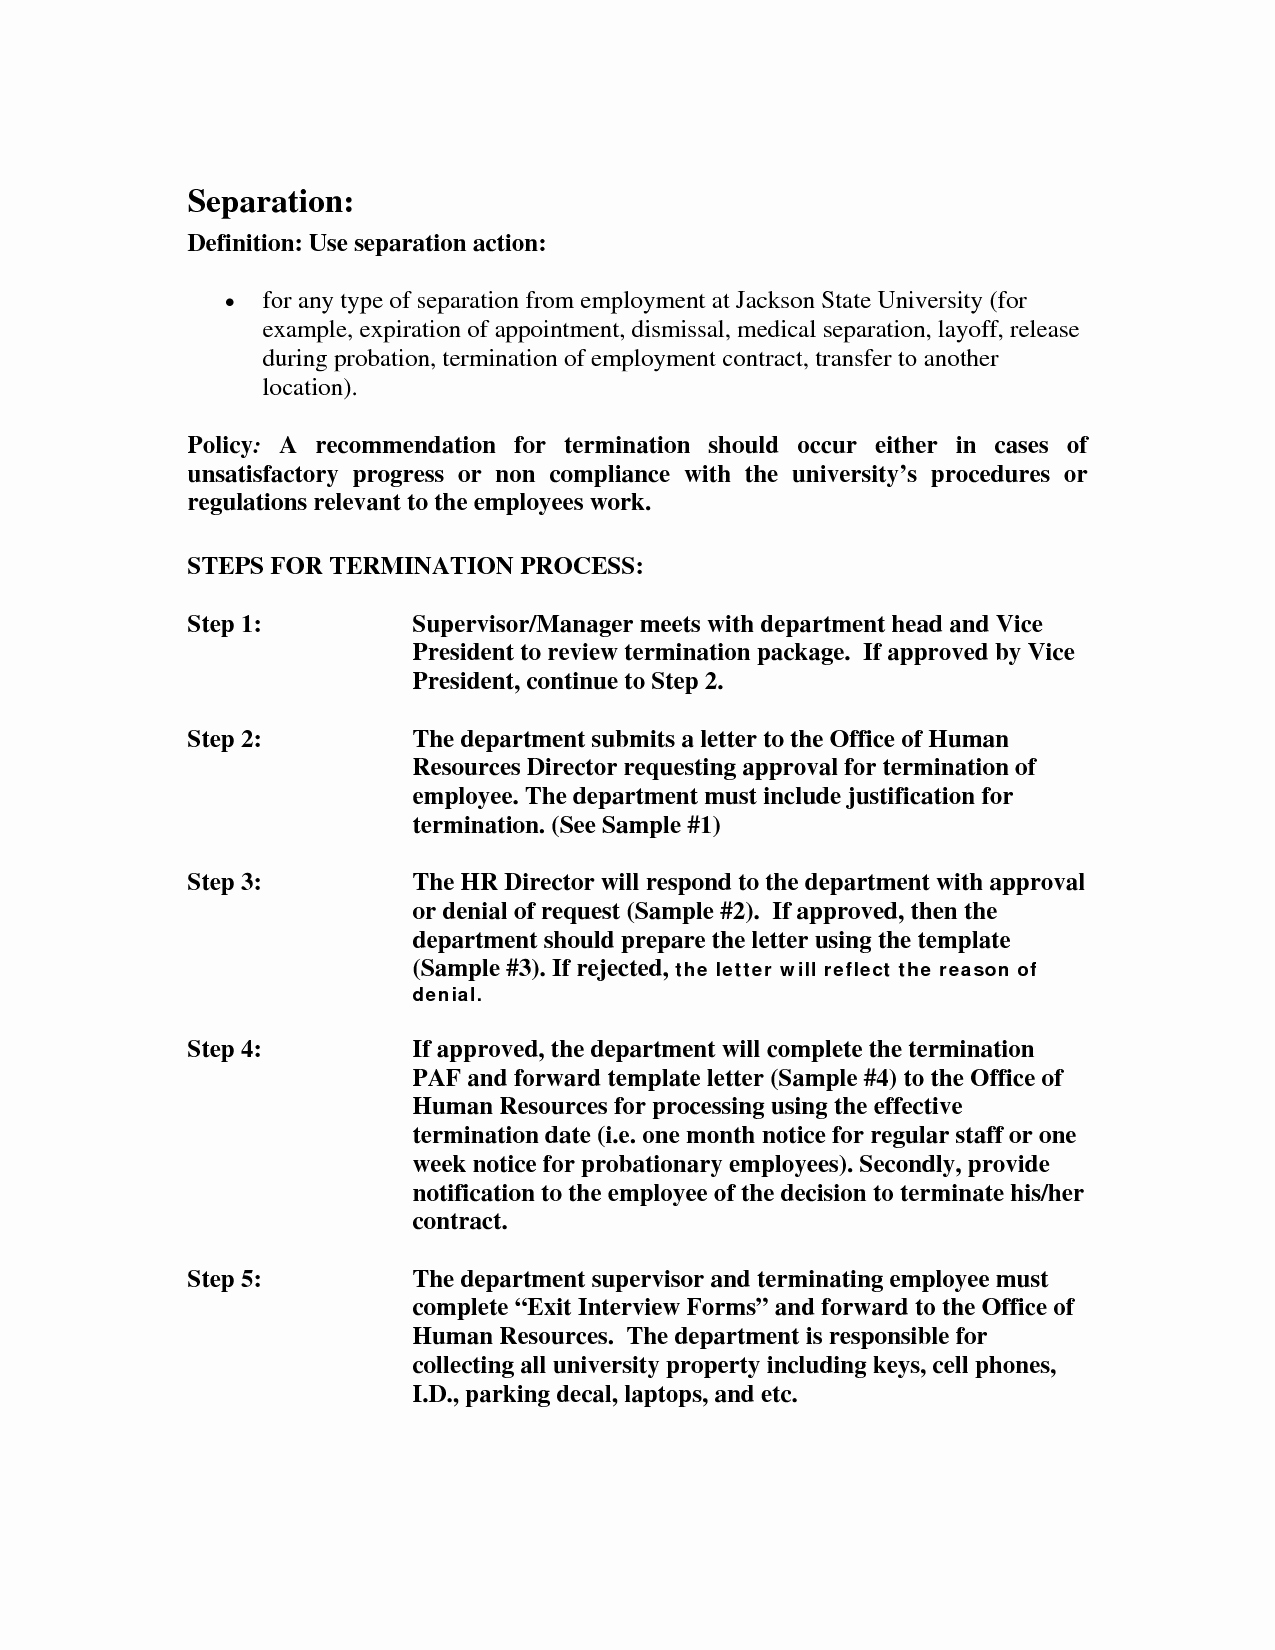 post 30 day probation letter template